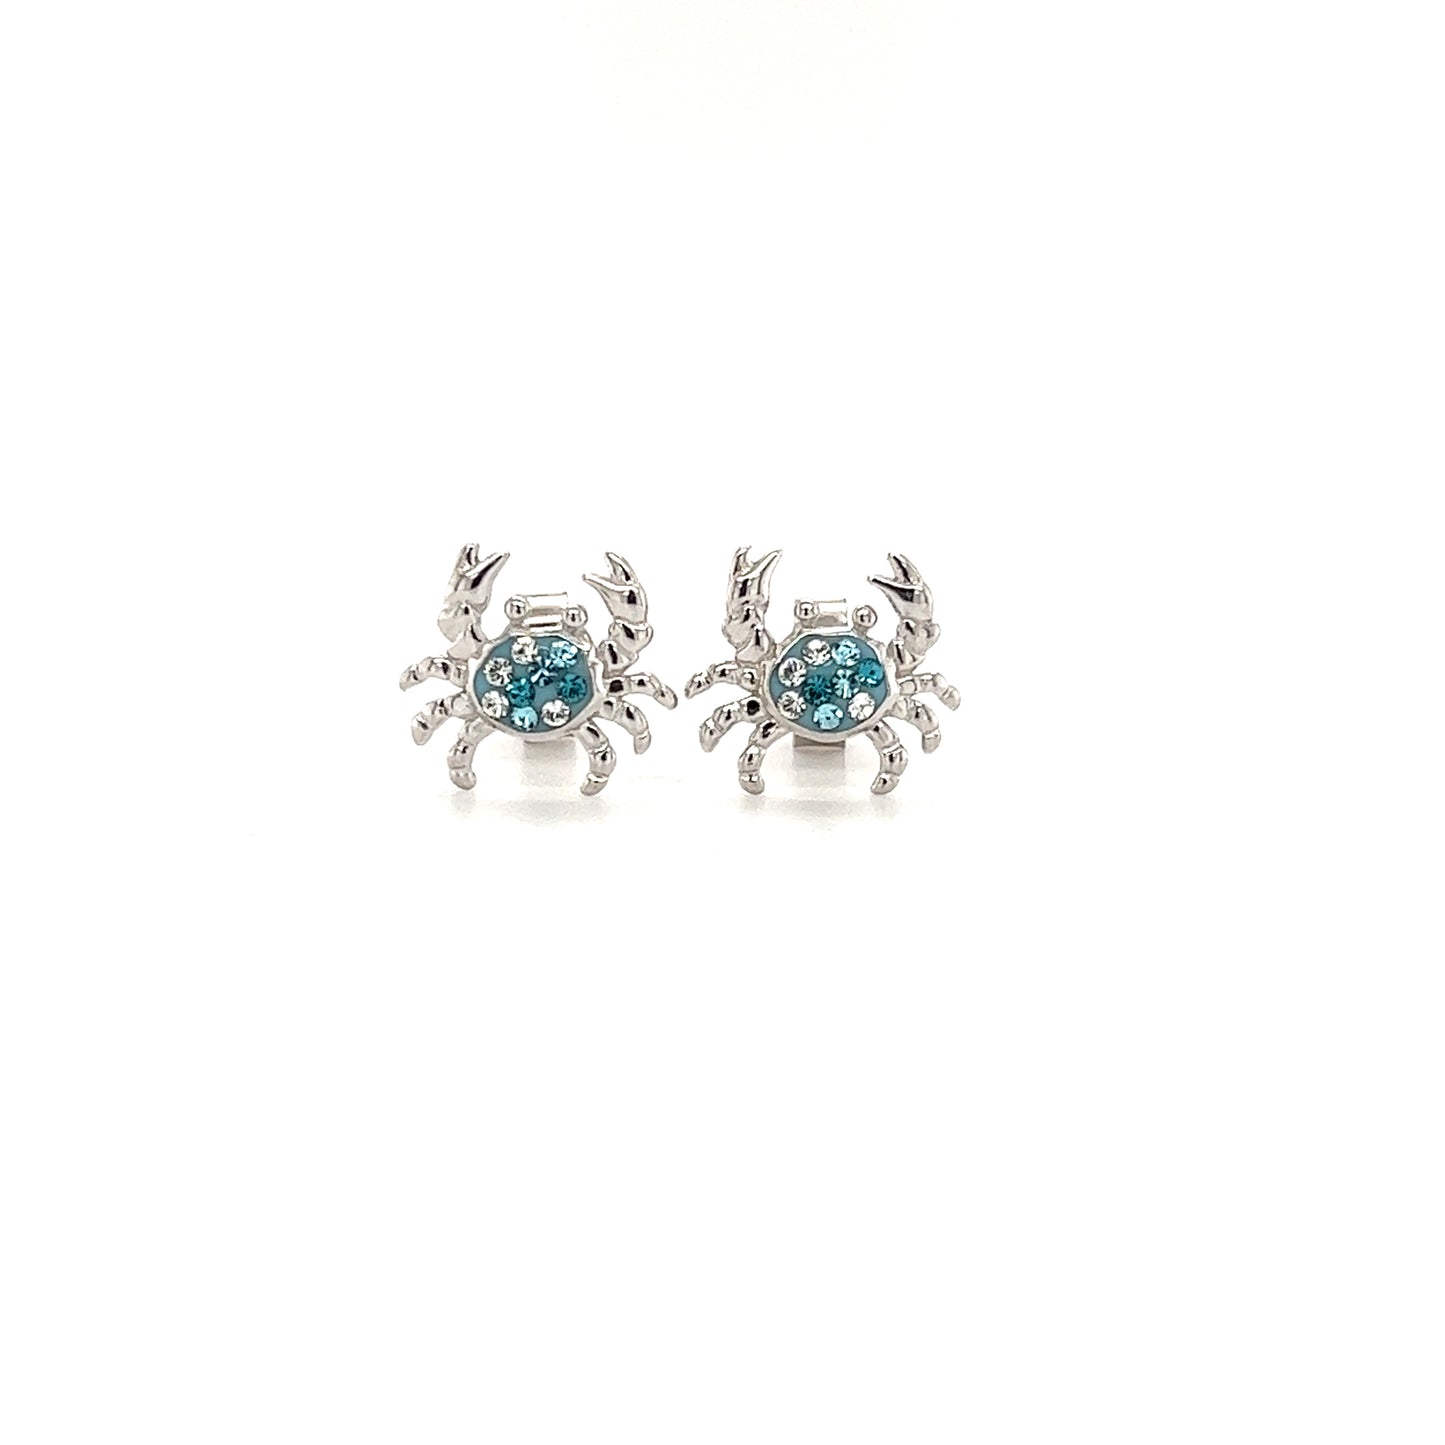 Blue Crab Stud Earrings with Aqua and White Crystals in Sterling Silver Front View